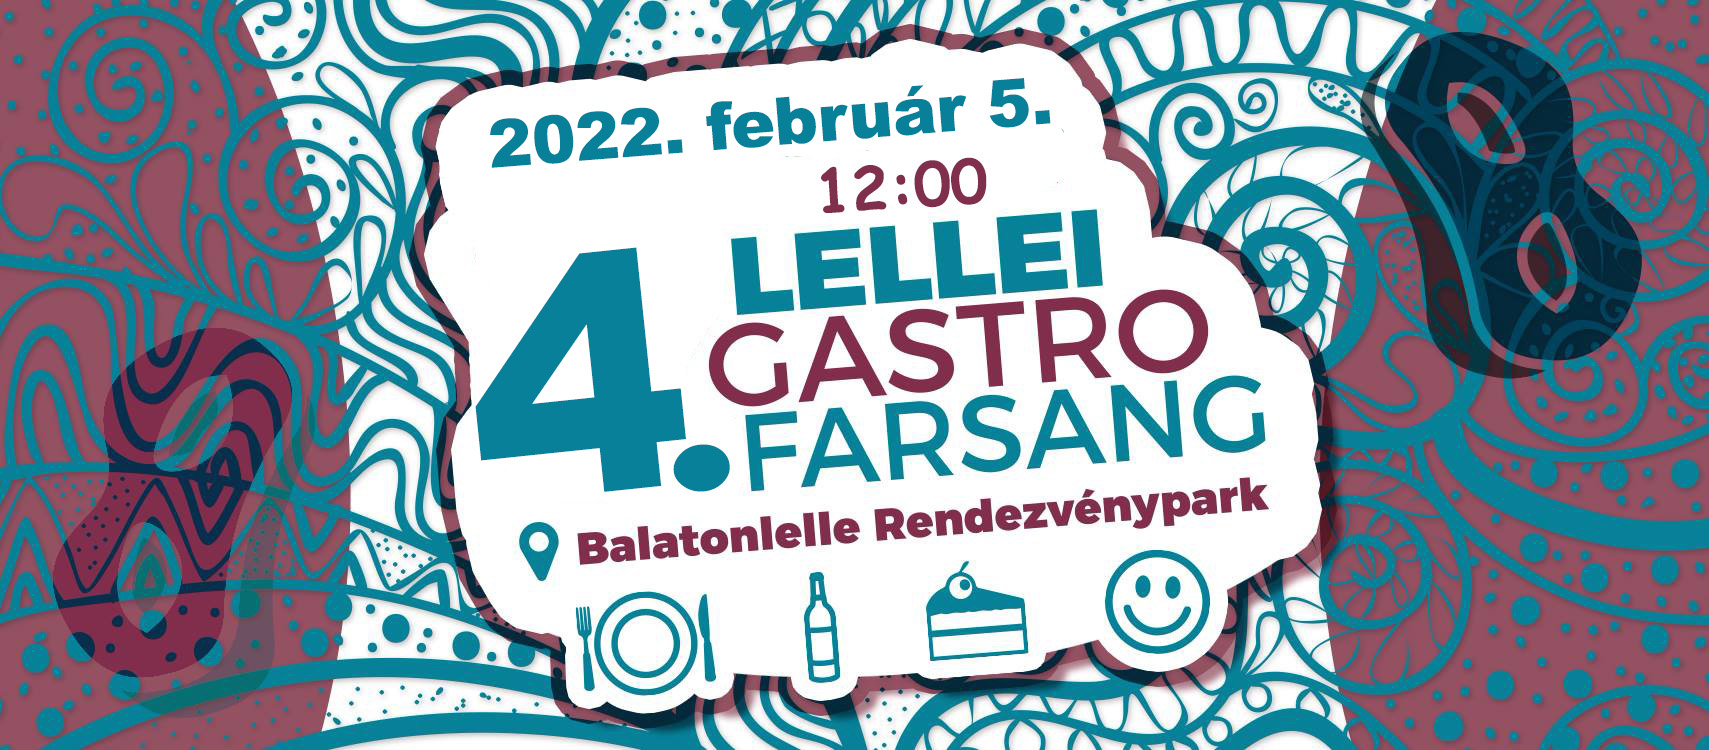 The 4th Edition of the Lelle Gastro Carnival